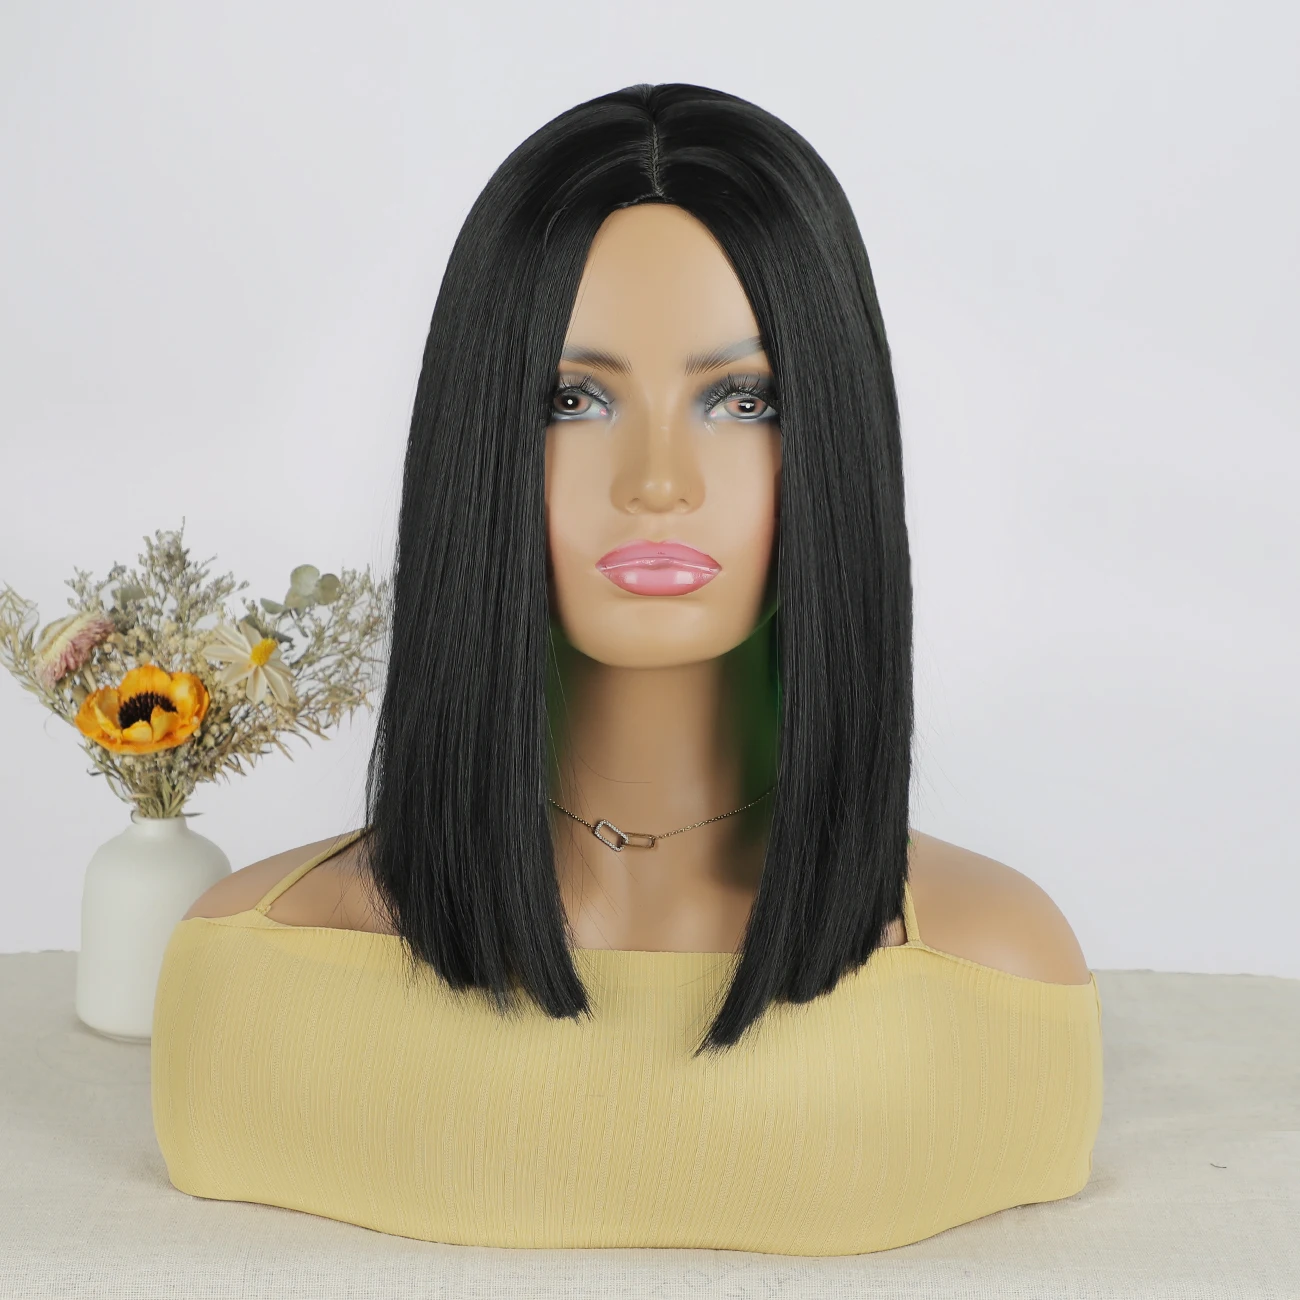 

women's wig short hair, Brazilian highlighted straight hair, center parting bob wig wigs, red mix black bob wig cosplay